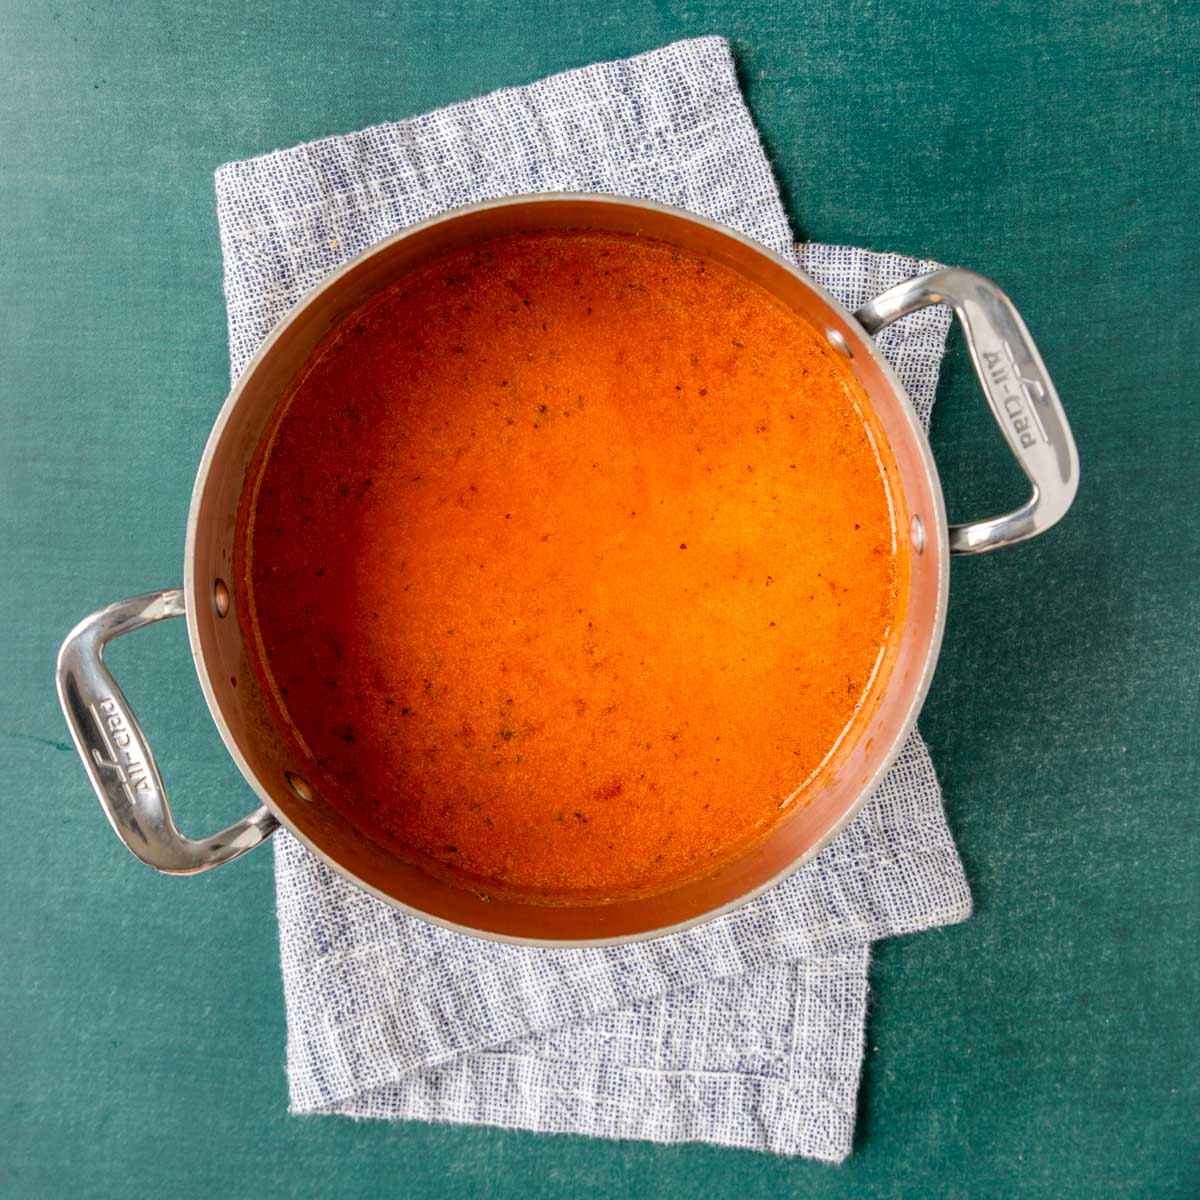 Easy tomato basil soup in an all clad pot